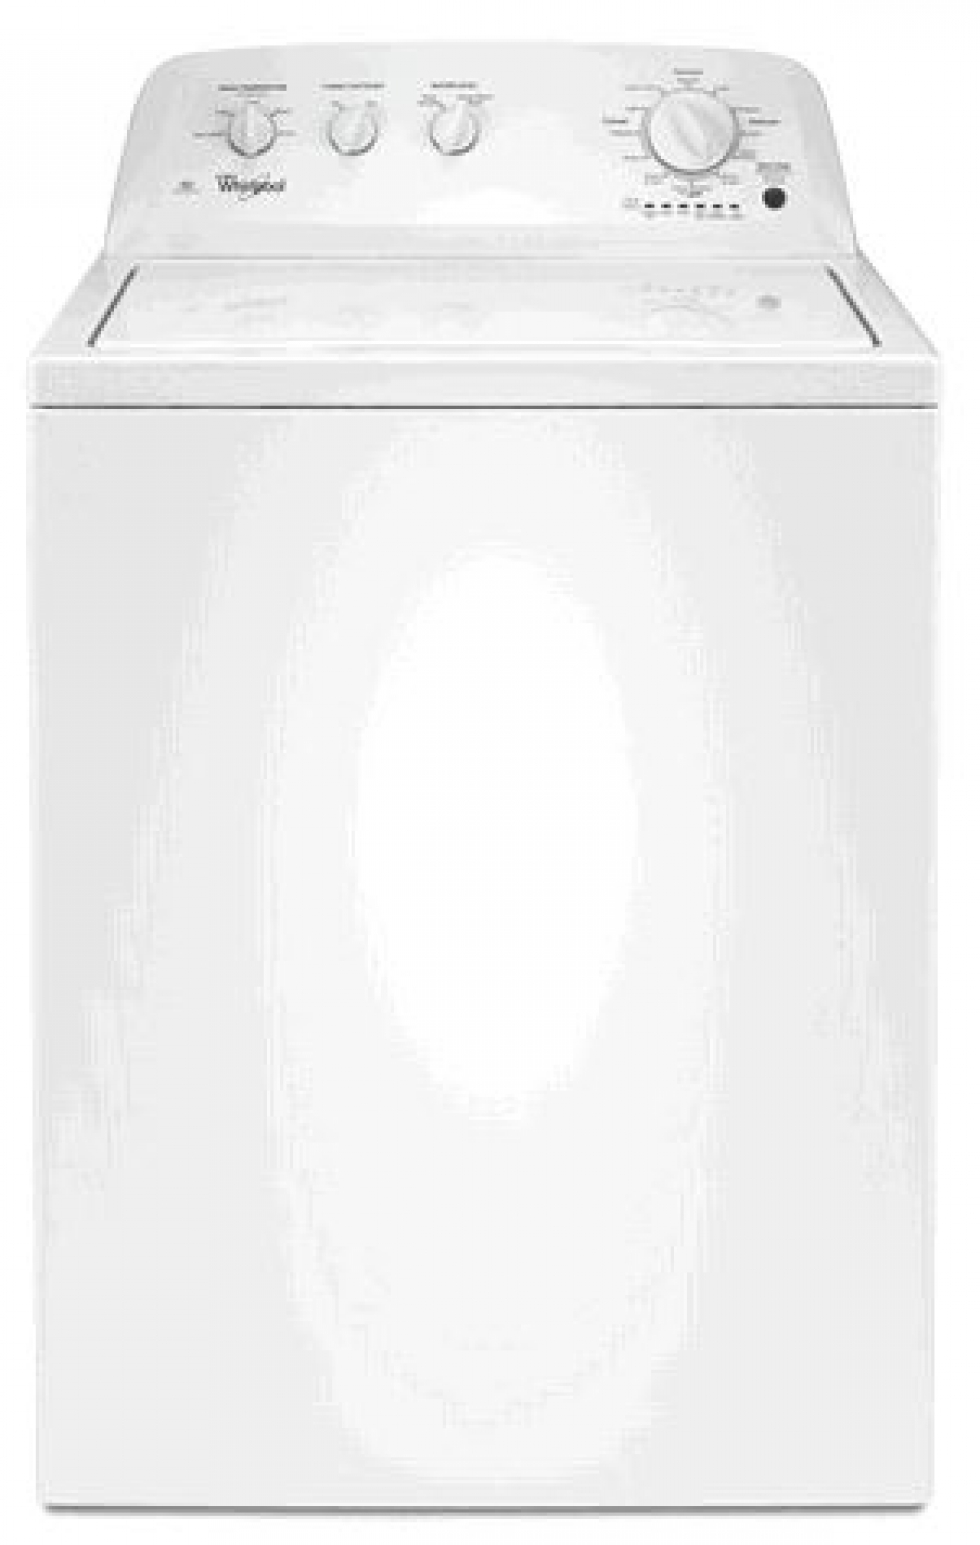 4.0 cu. ft. Top Load Washer with the Deep Water Wash option